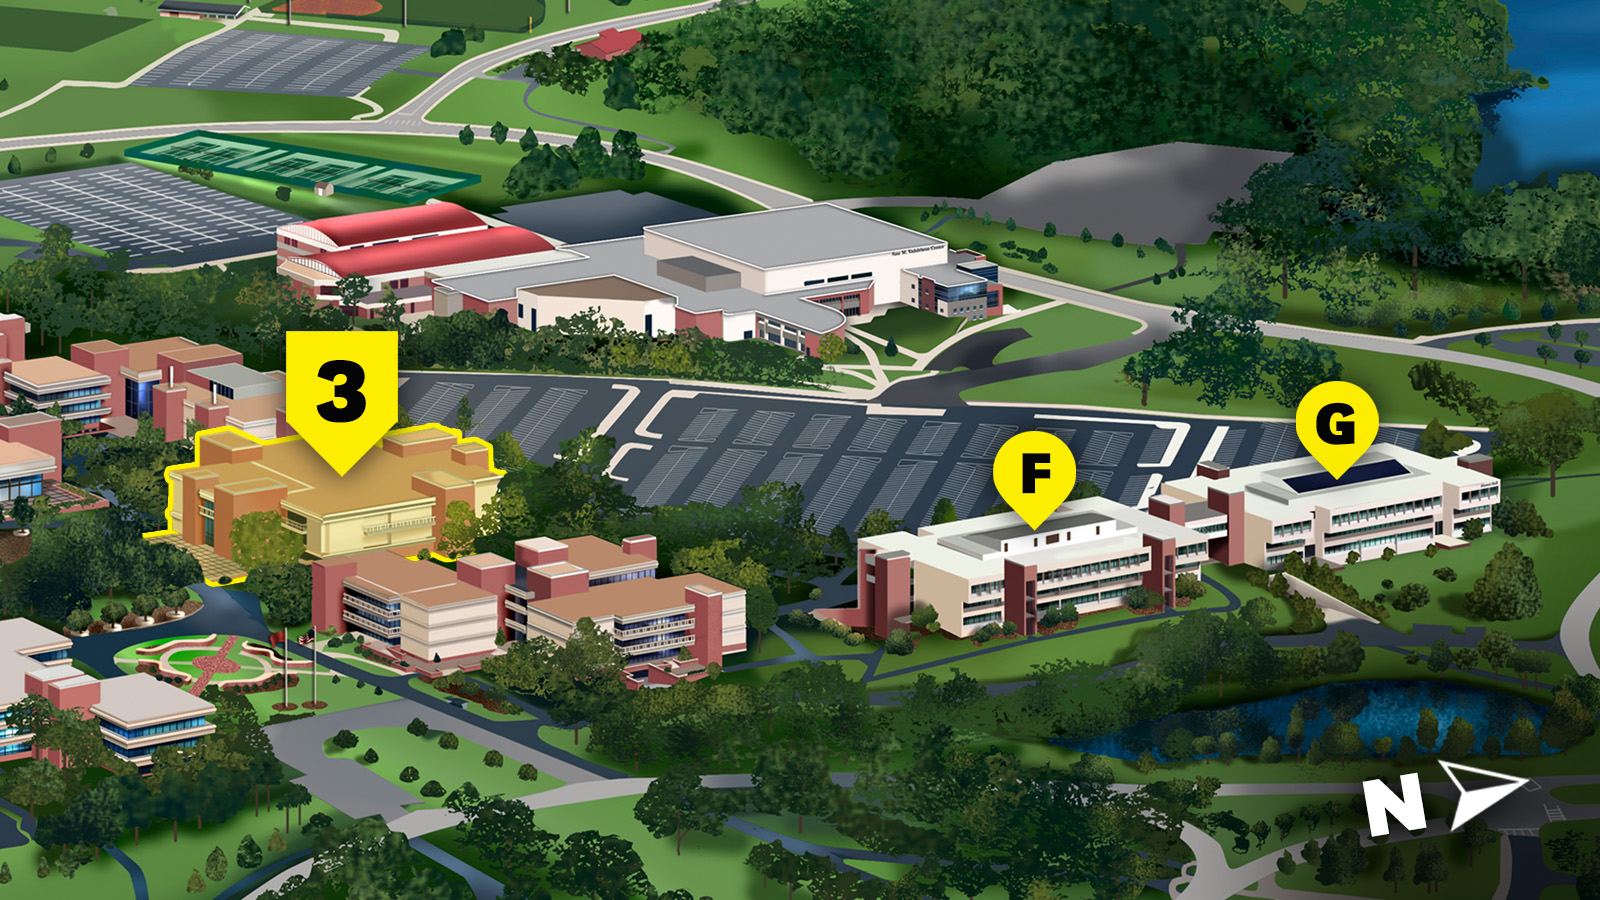 campus map highlight areas near lovejoy library